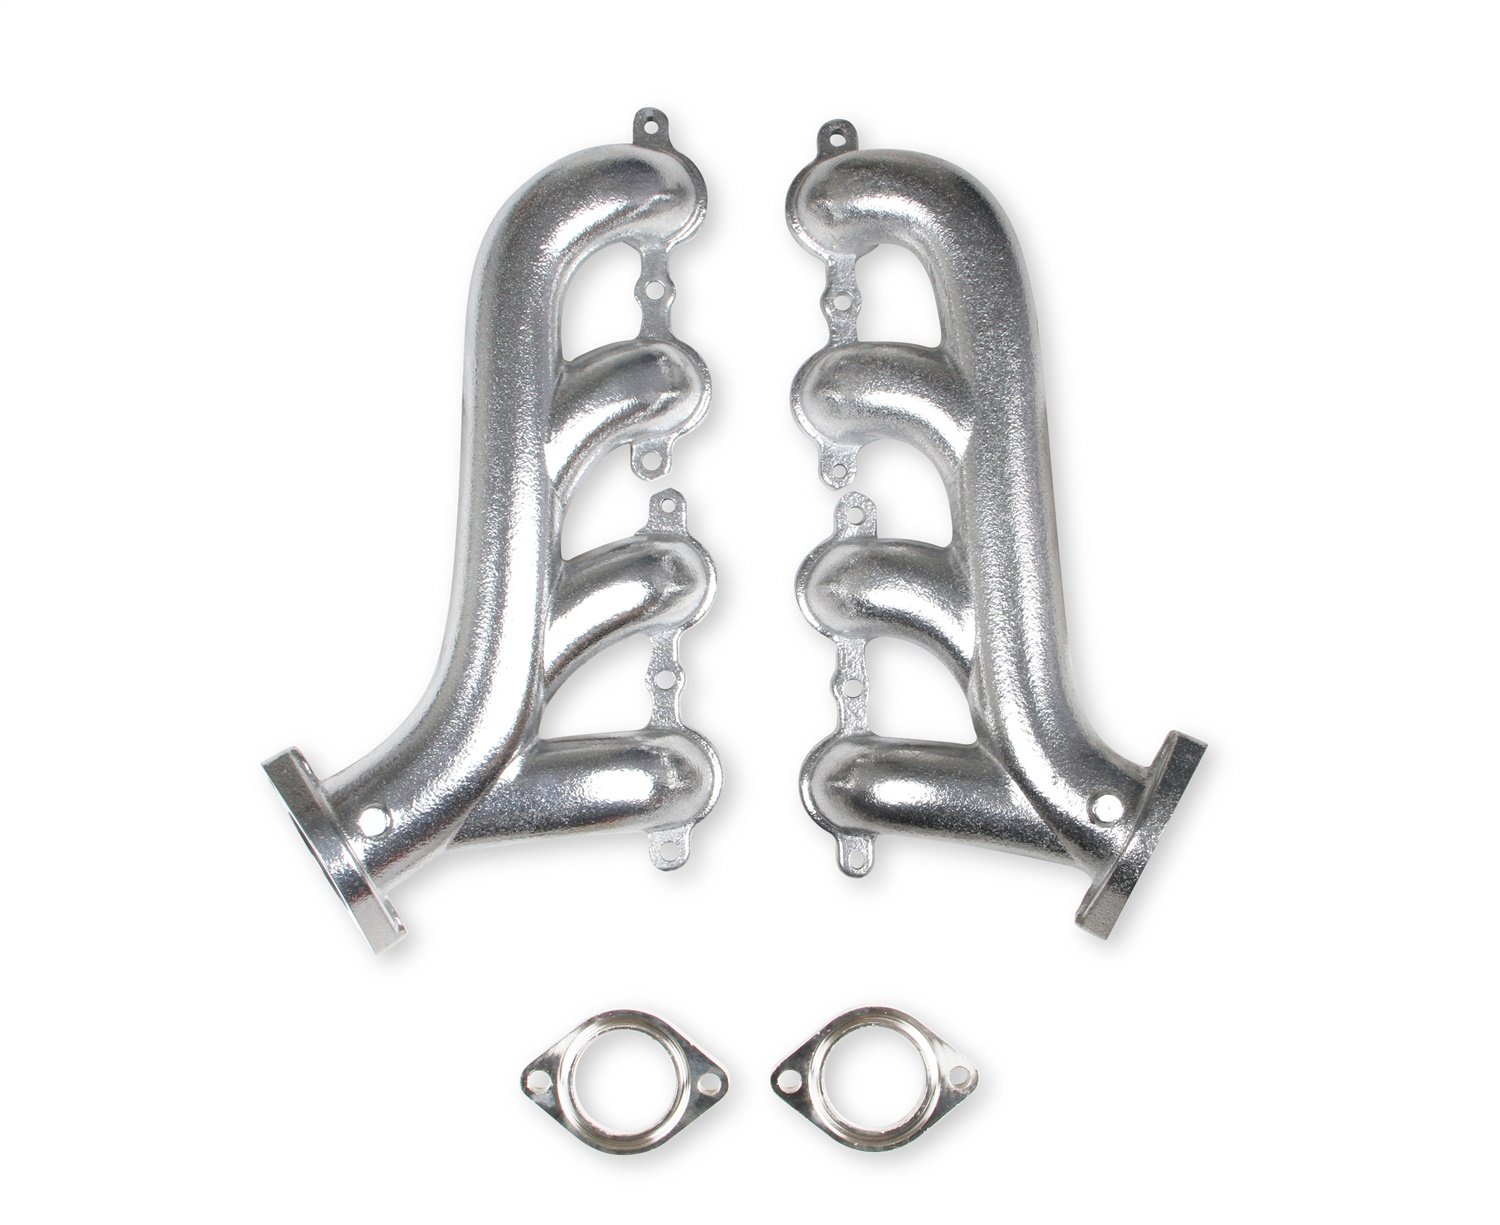 Cast Iron Exhaust Manifolds for GM Gen III, IV LS Engines [Silver Ceramic Finish]